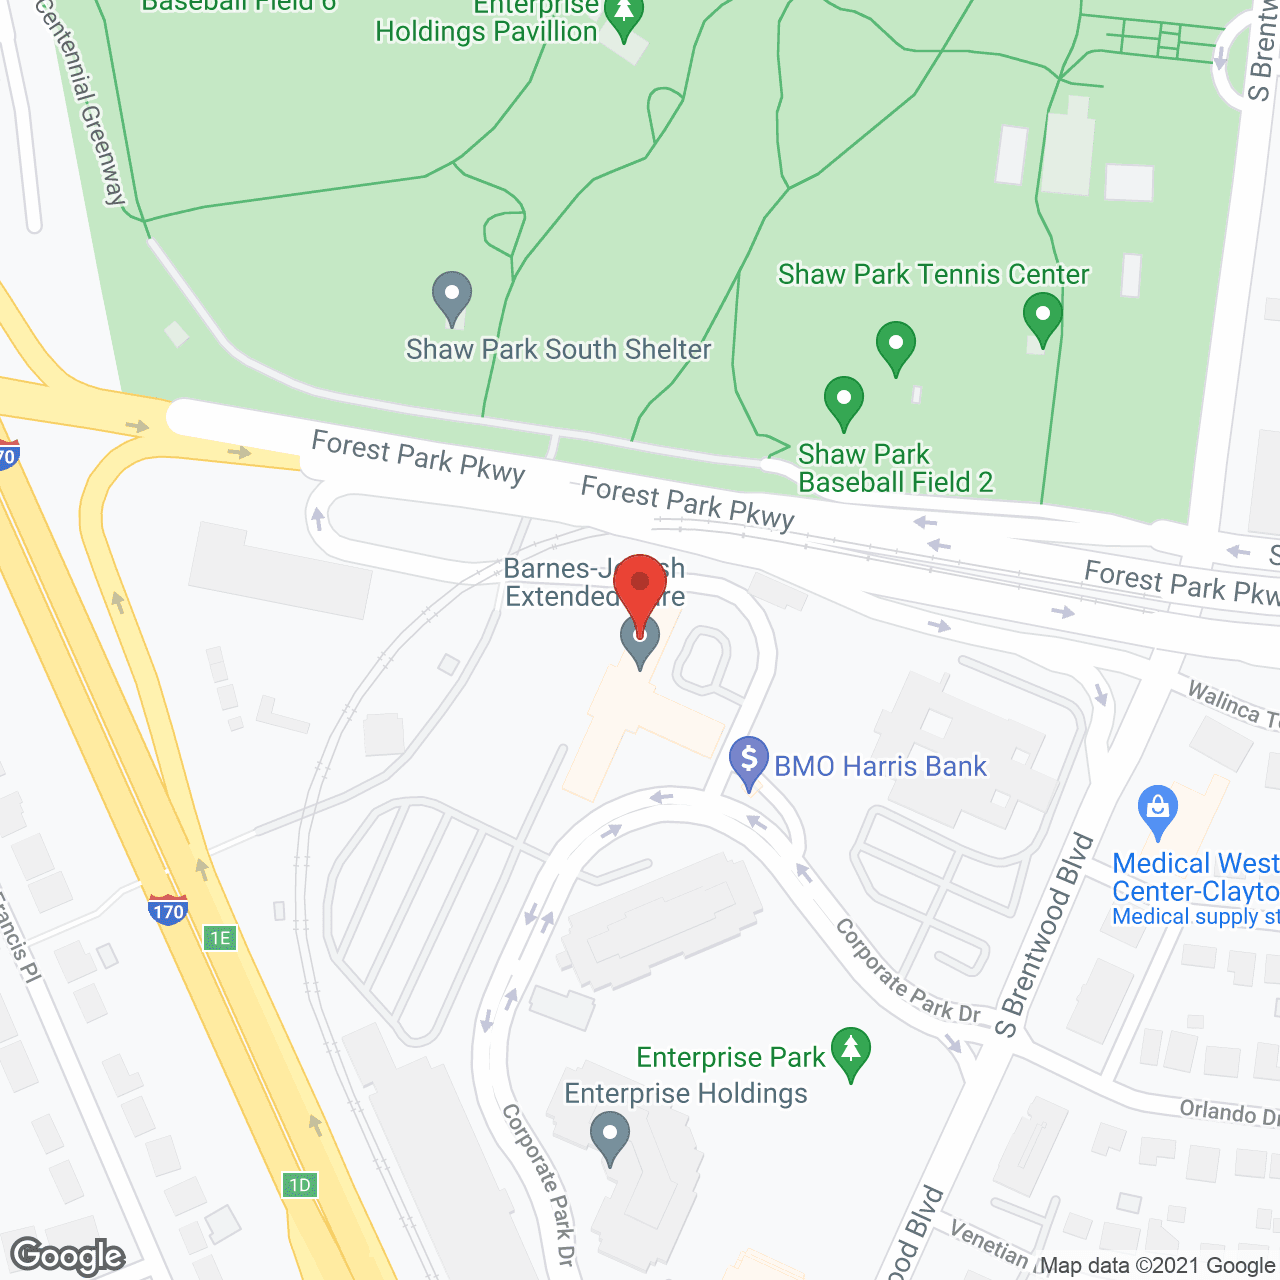 Barnes-Jewish Extended Care in google map